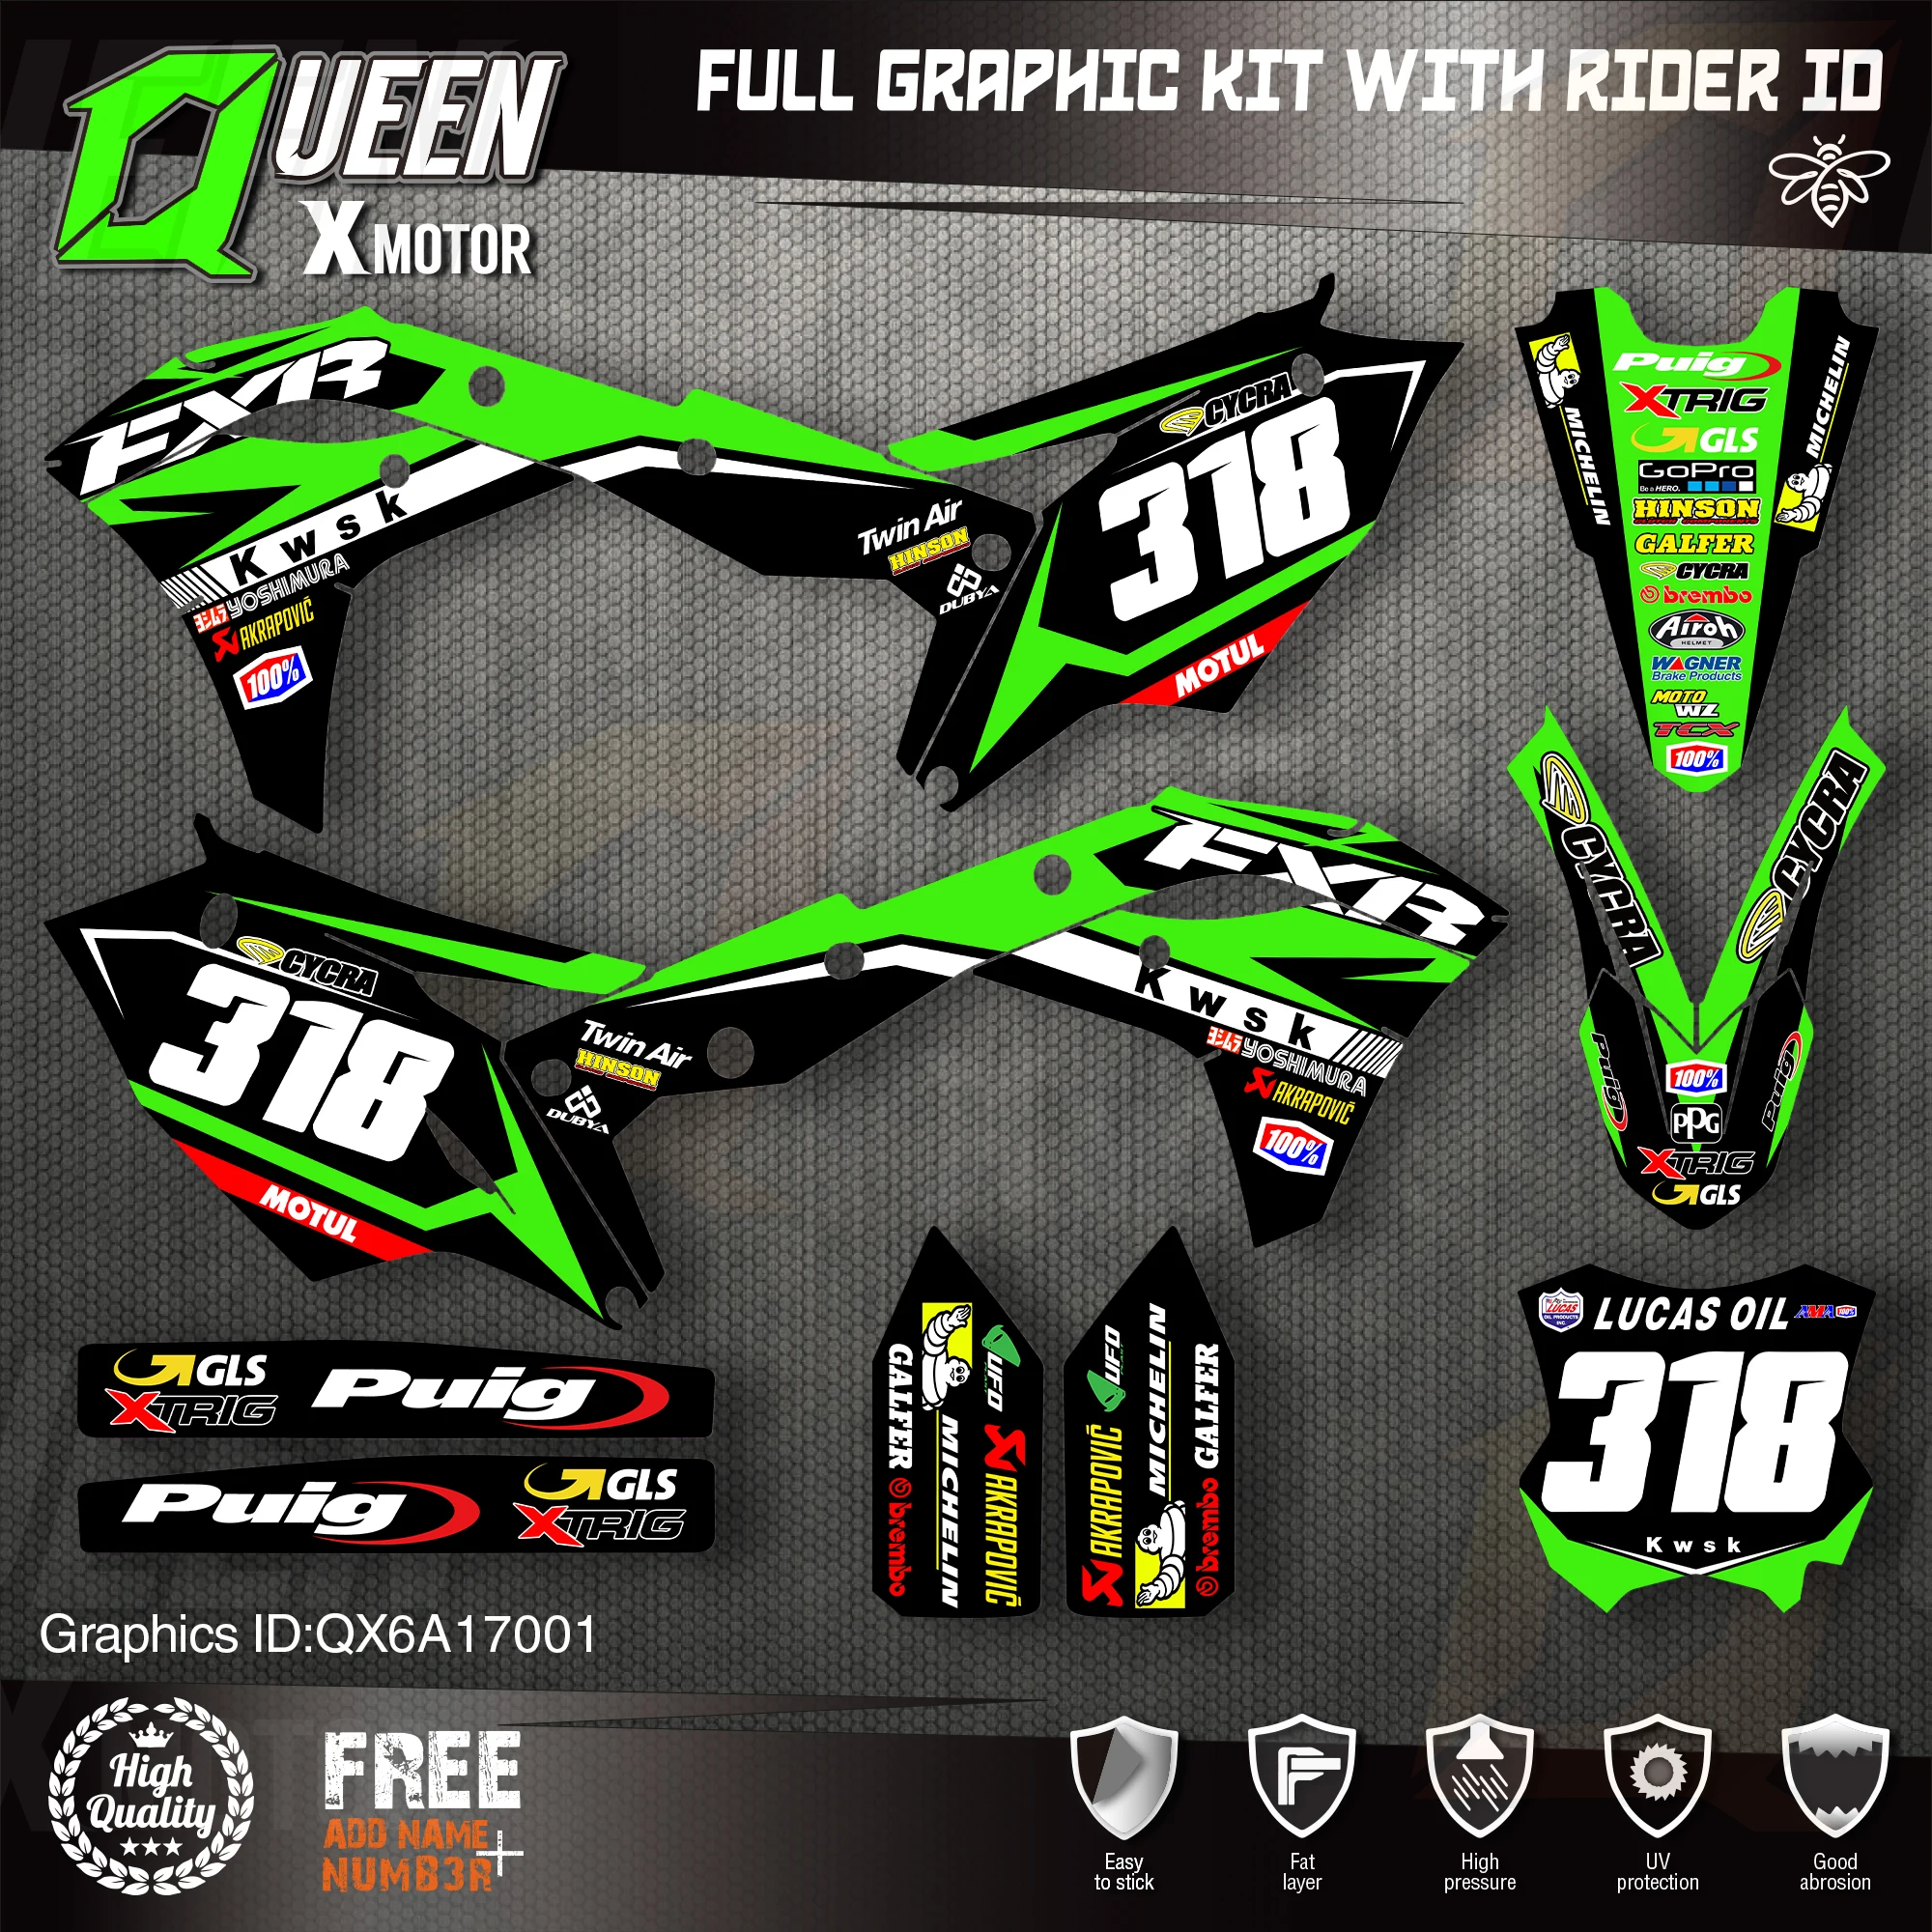 Queen X MOTOR Custom Team Graphics Decals Stickers Kit For Kawasaki Decal 2017 2018 2019 2020 KXF 250 001